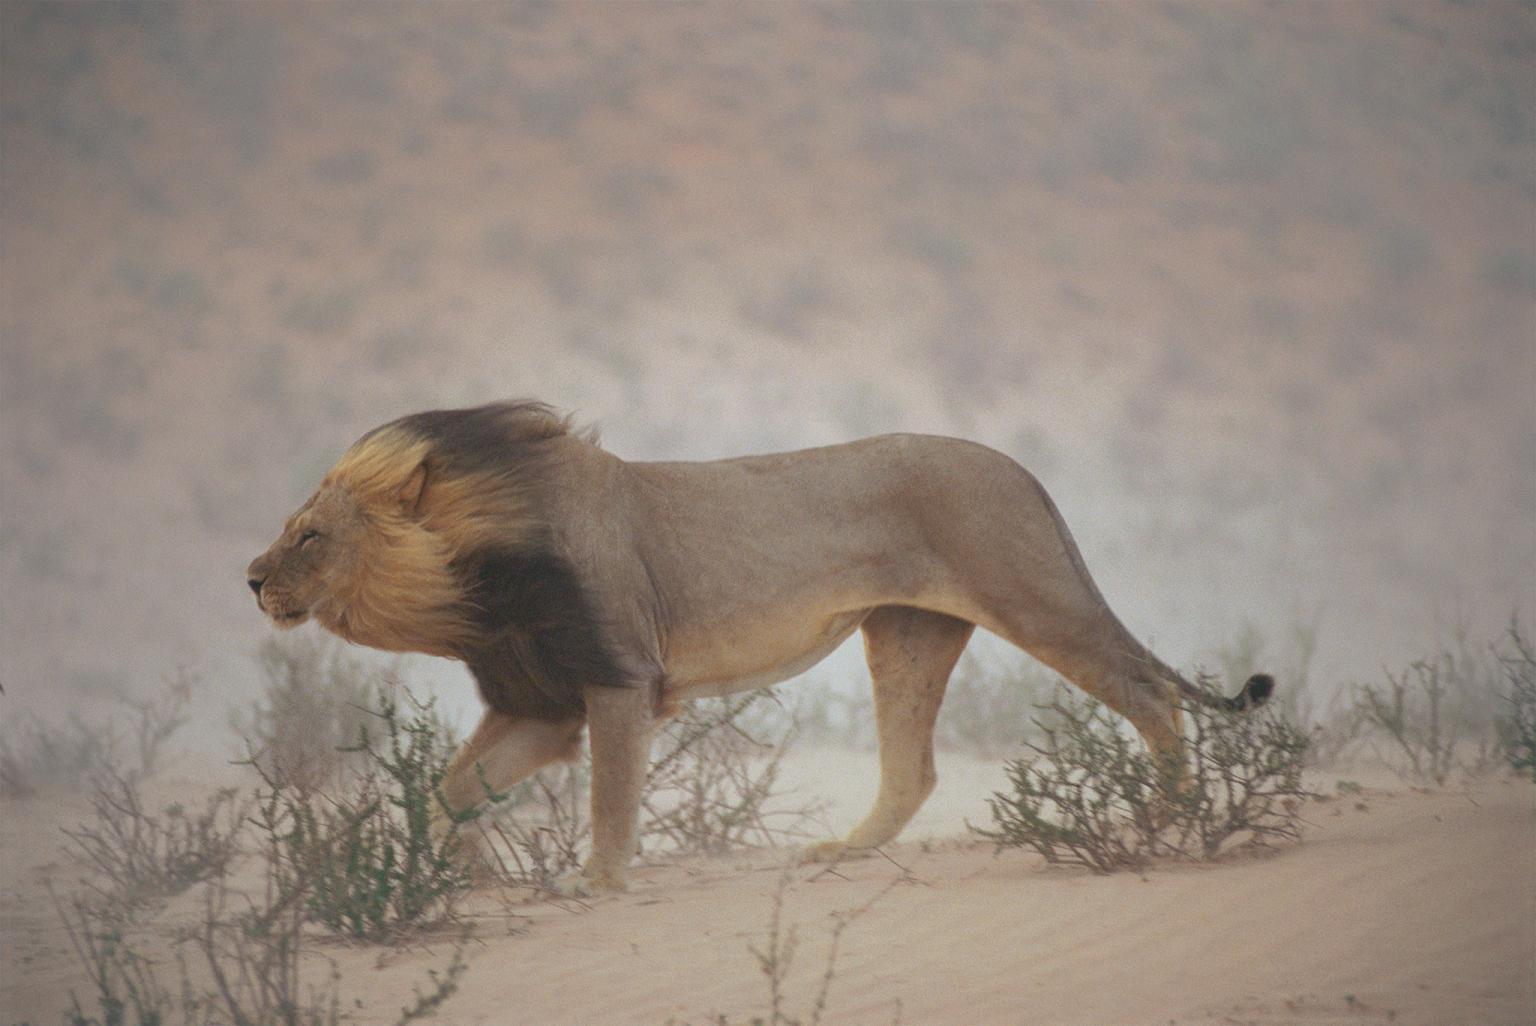 A lion wanders the dry Nossob riverbed in the Kgalagadi Transfrontier Park